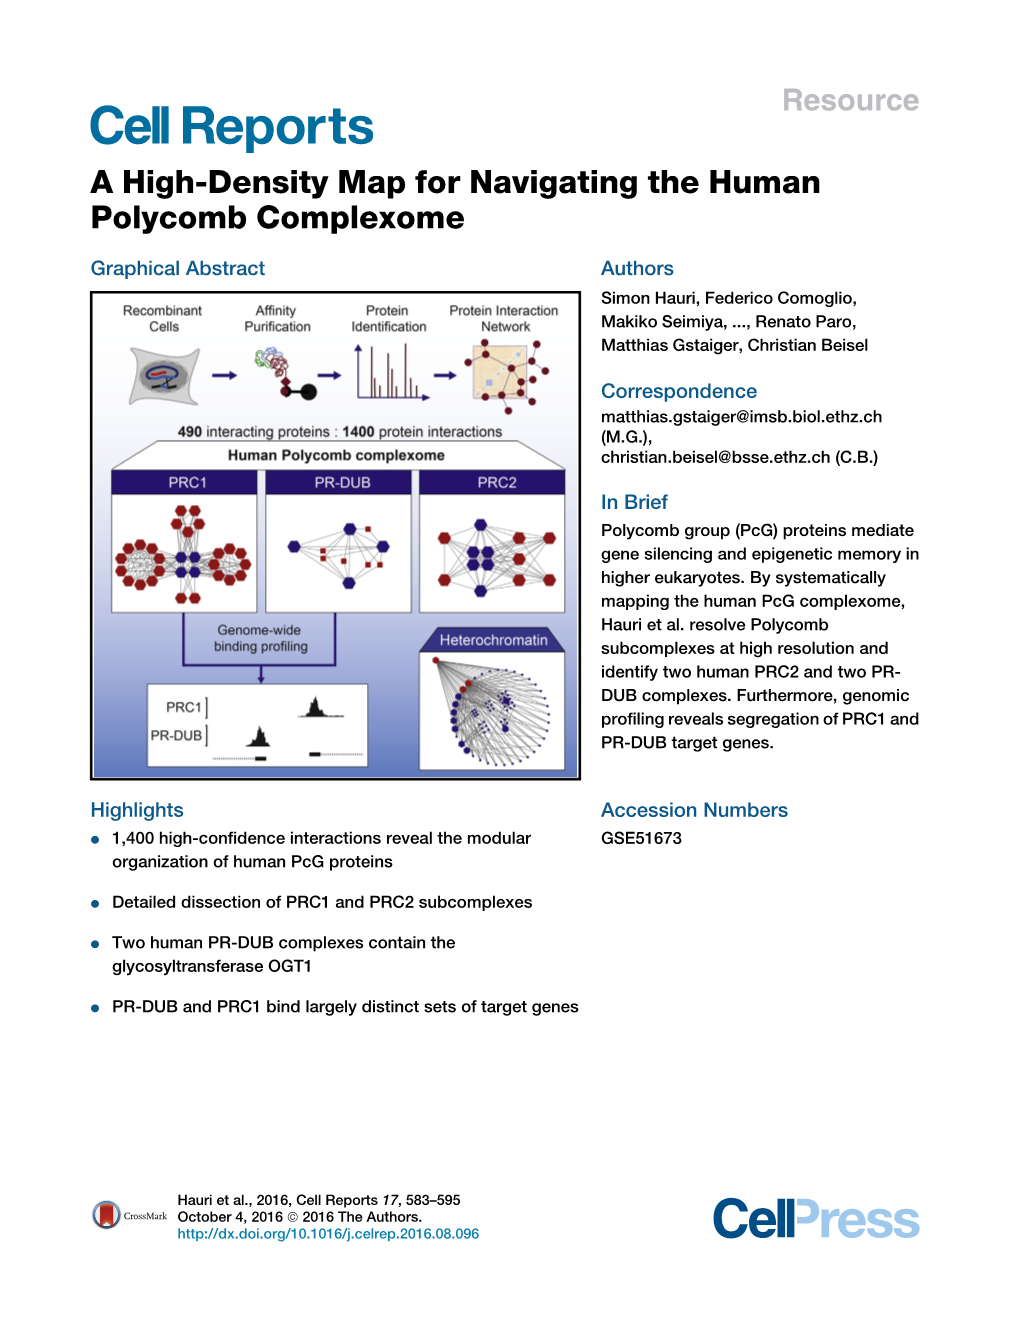 A High-Density Map for Navigating the Human Polycomb Complexome